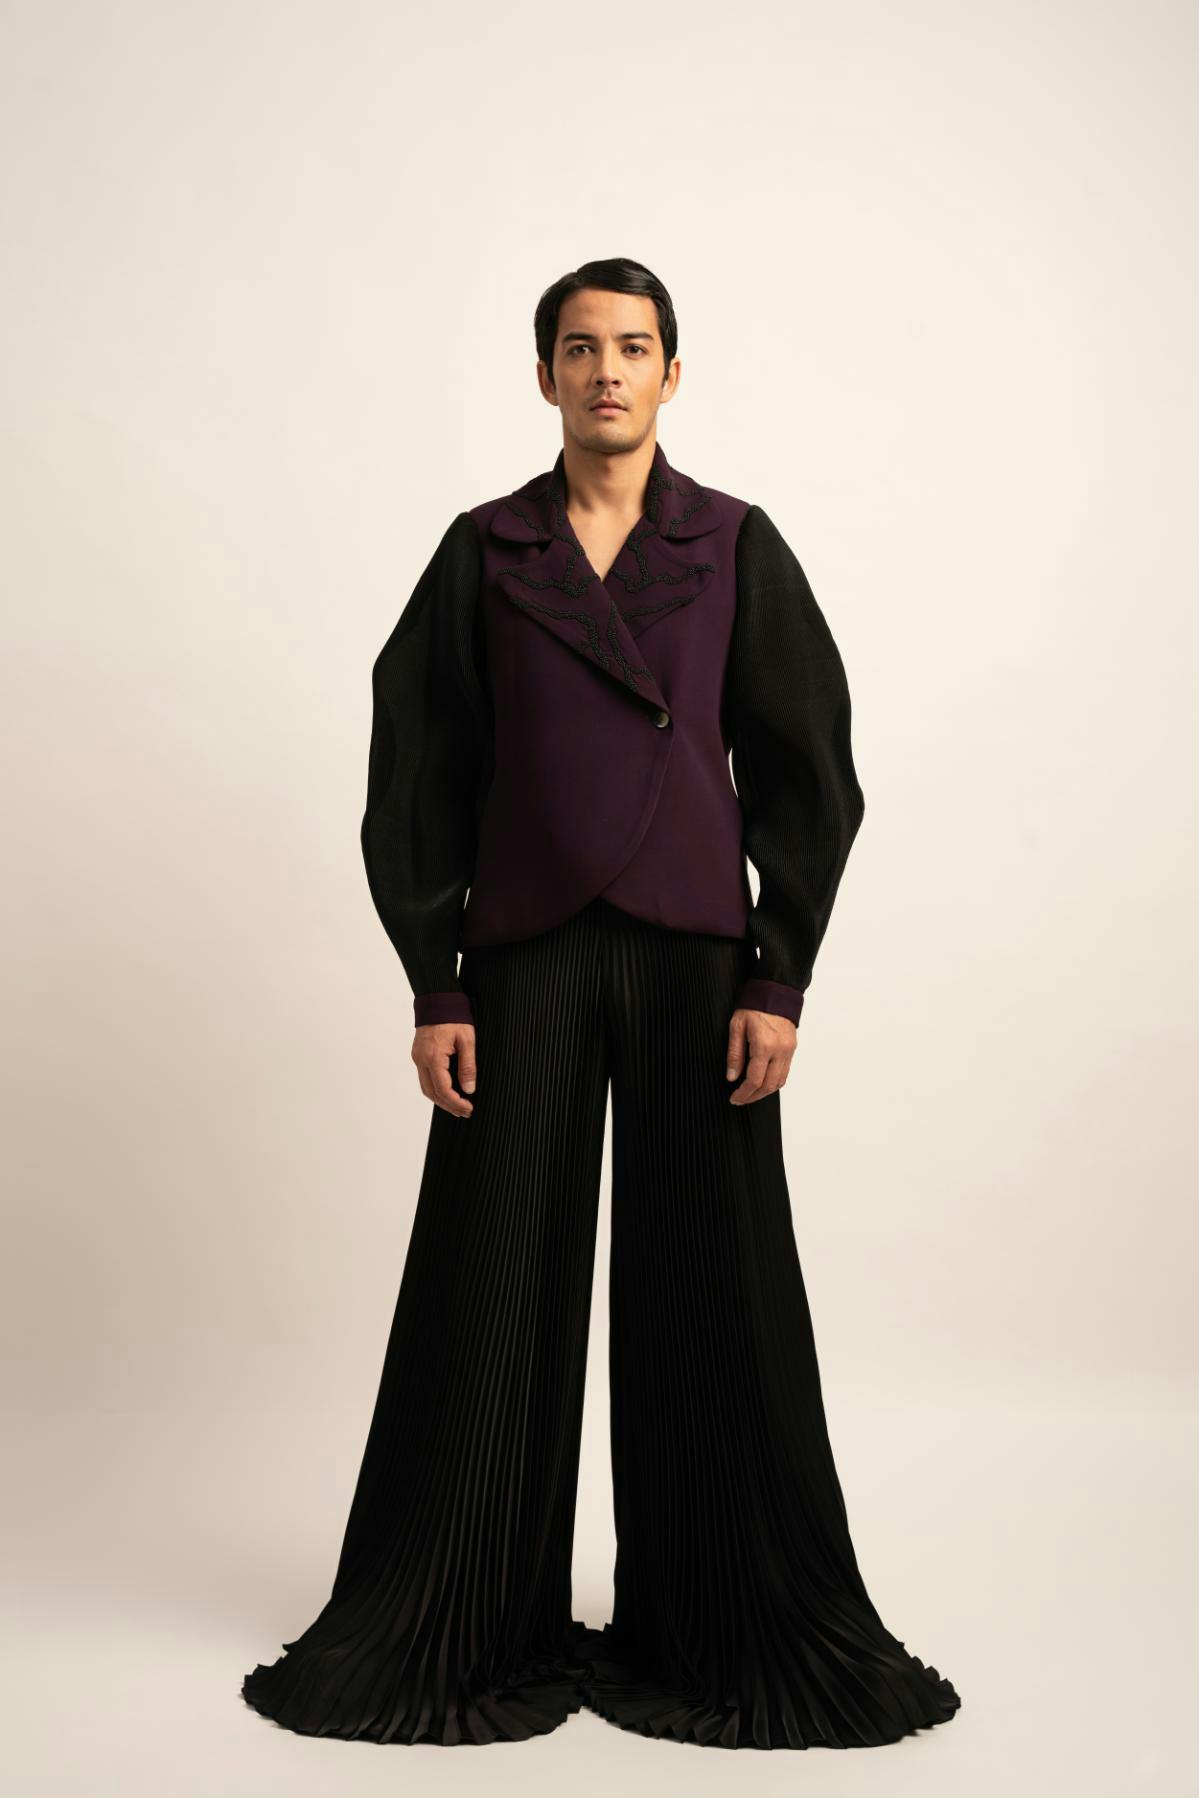 The Flux Fusion Blazer, a product by Siddhant Agrawal Label